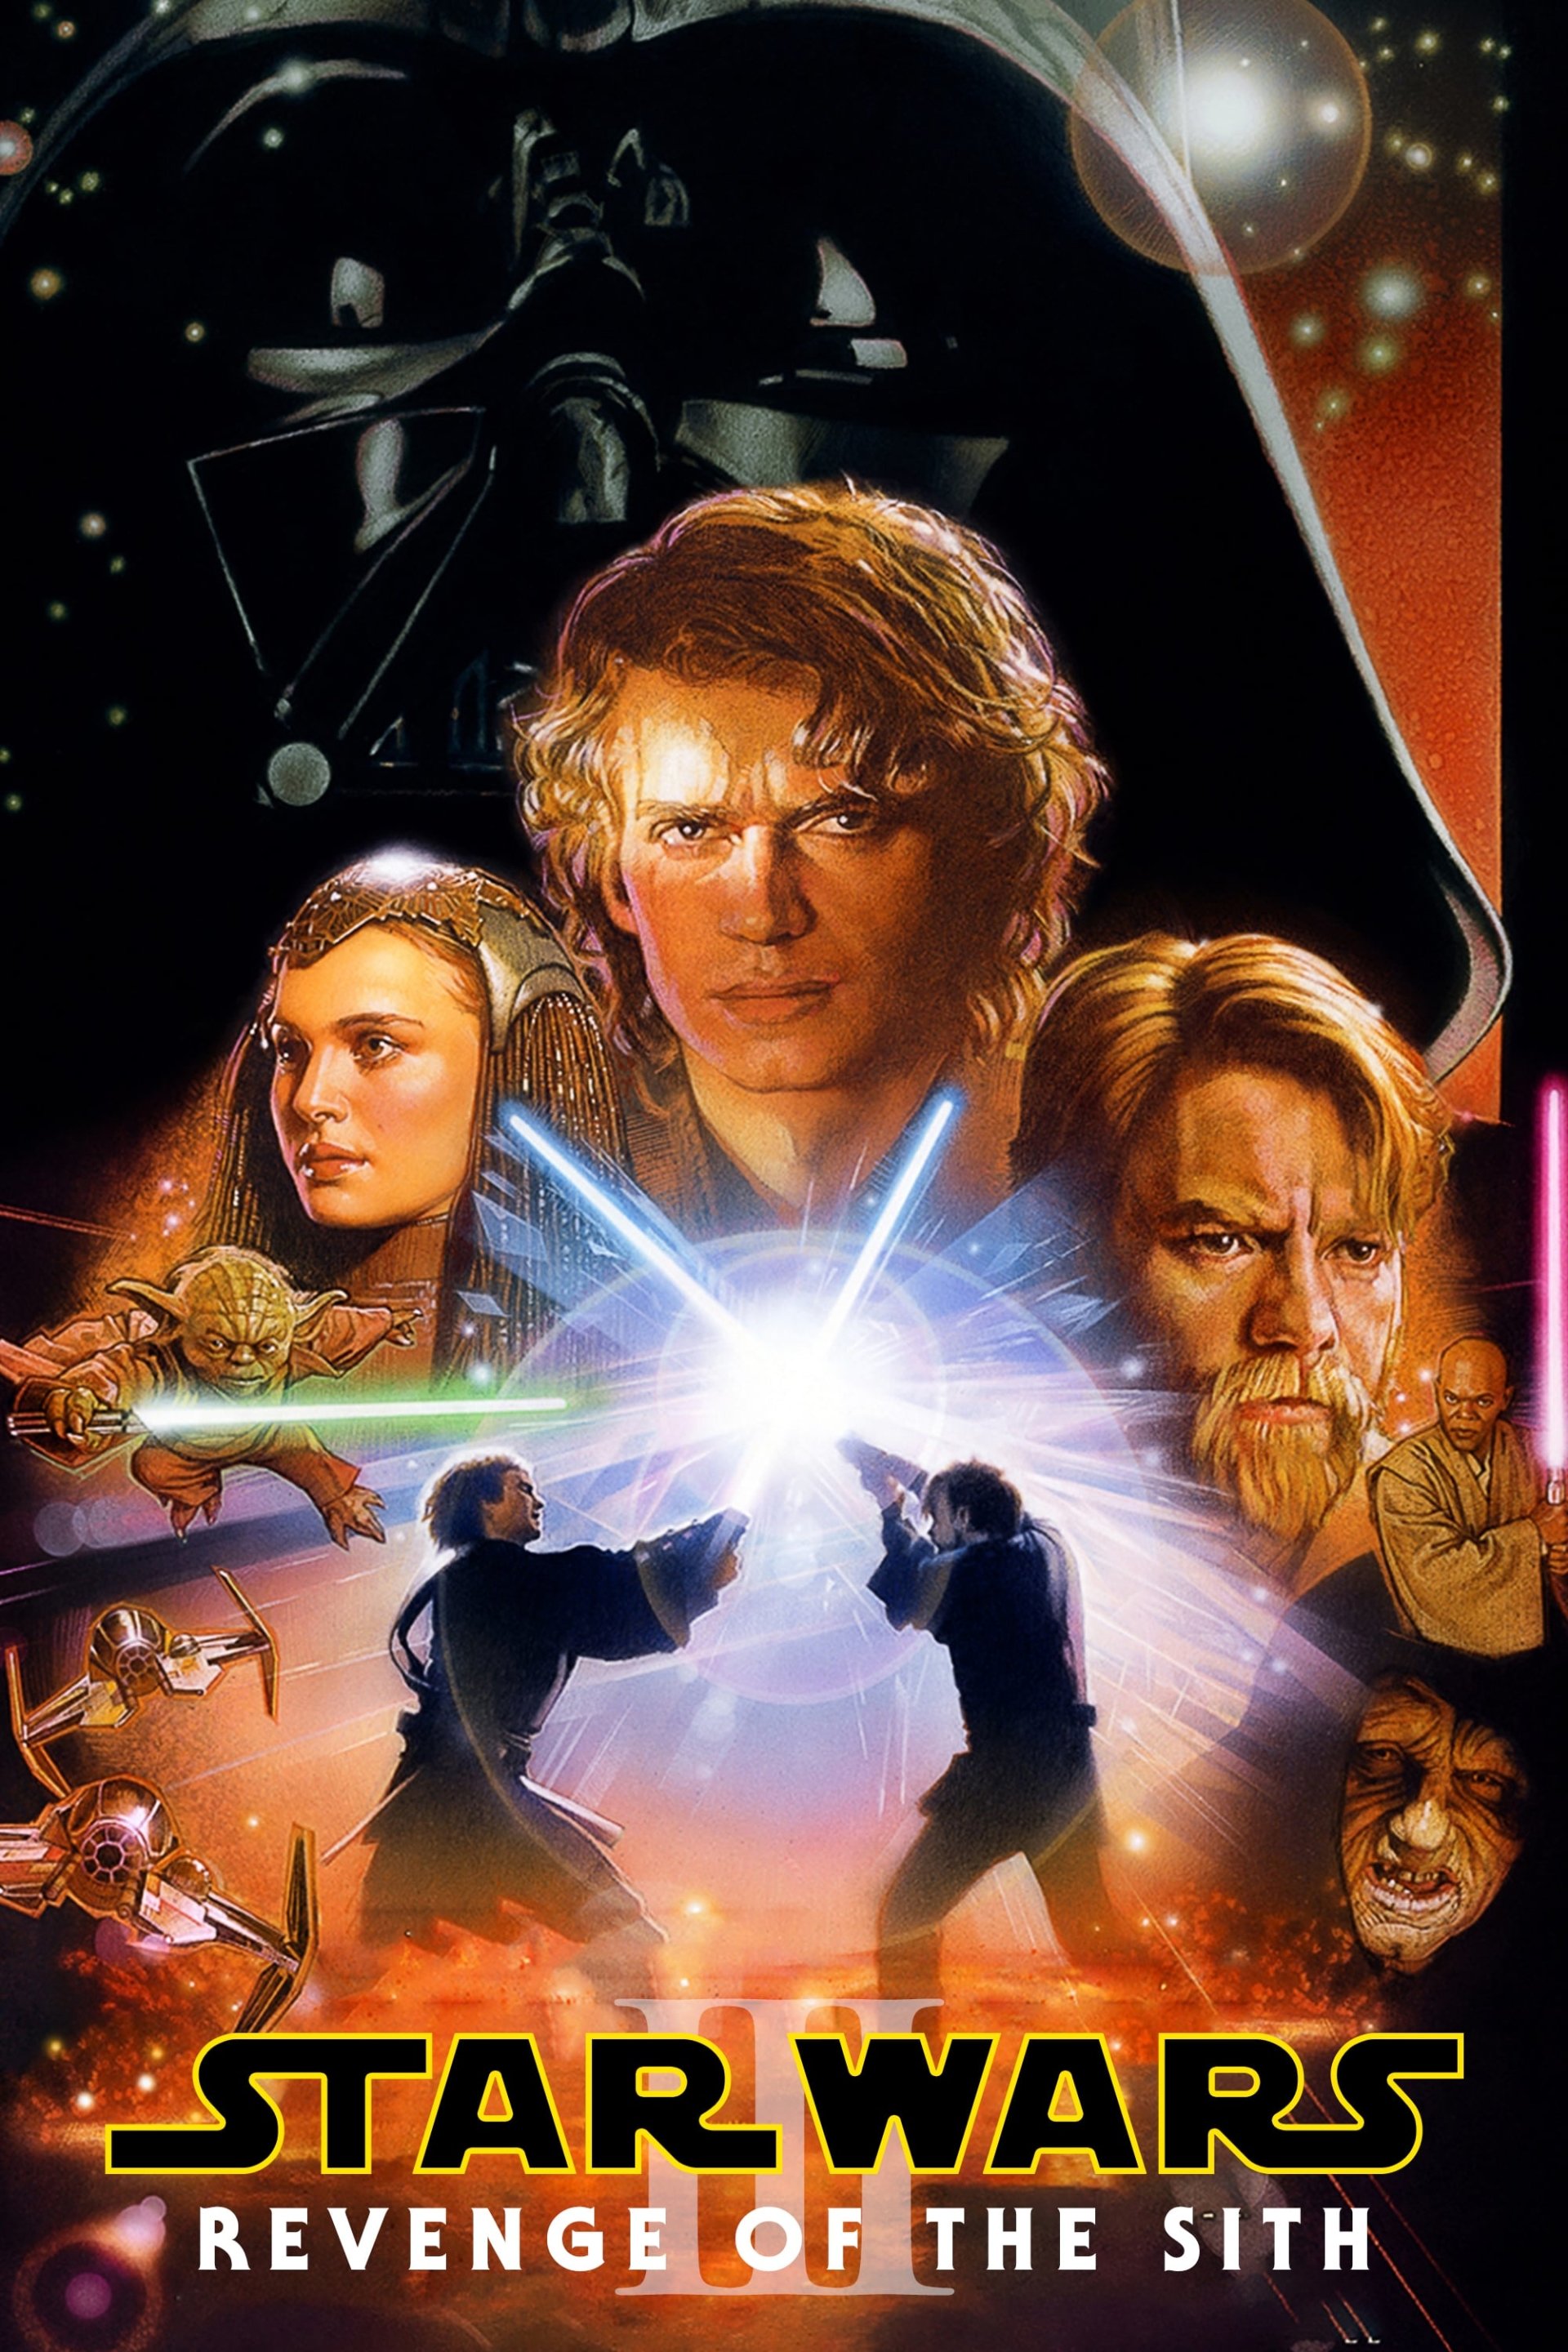 star wars the revenge of the sith ost download